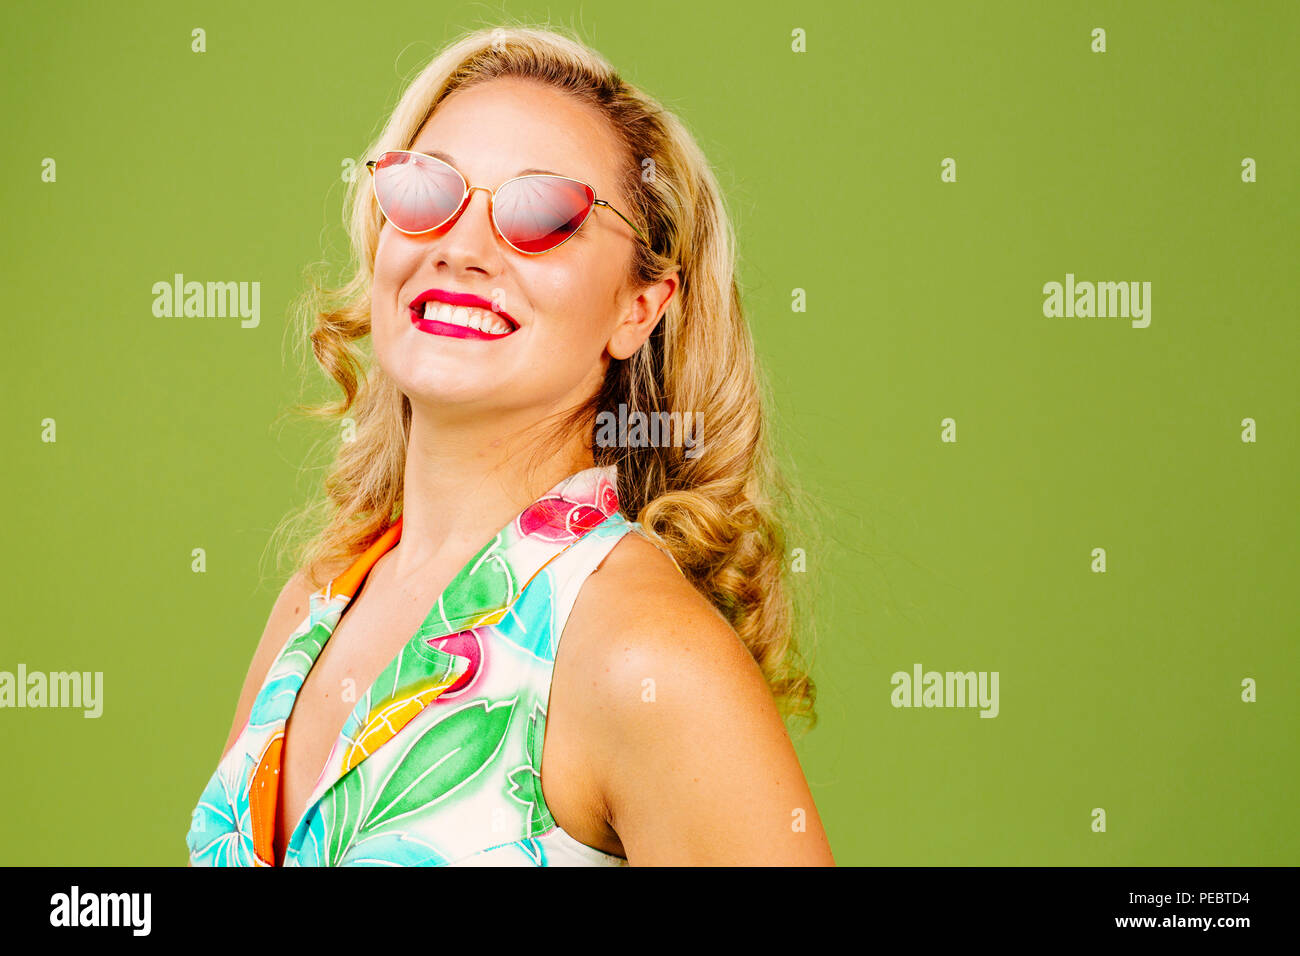 Smiling blonde woman with red sunglasses and summer dress tilting her head back, isolated on green studio background Stock Photo